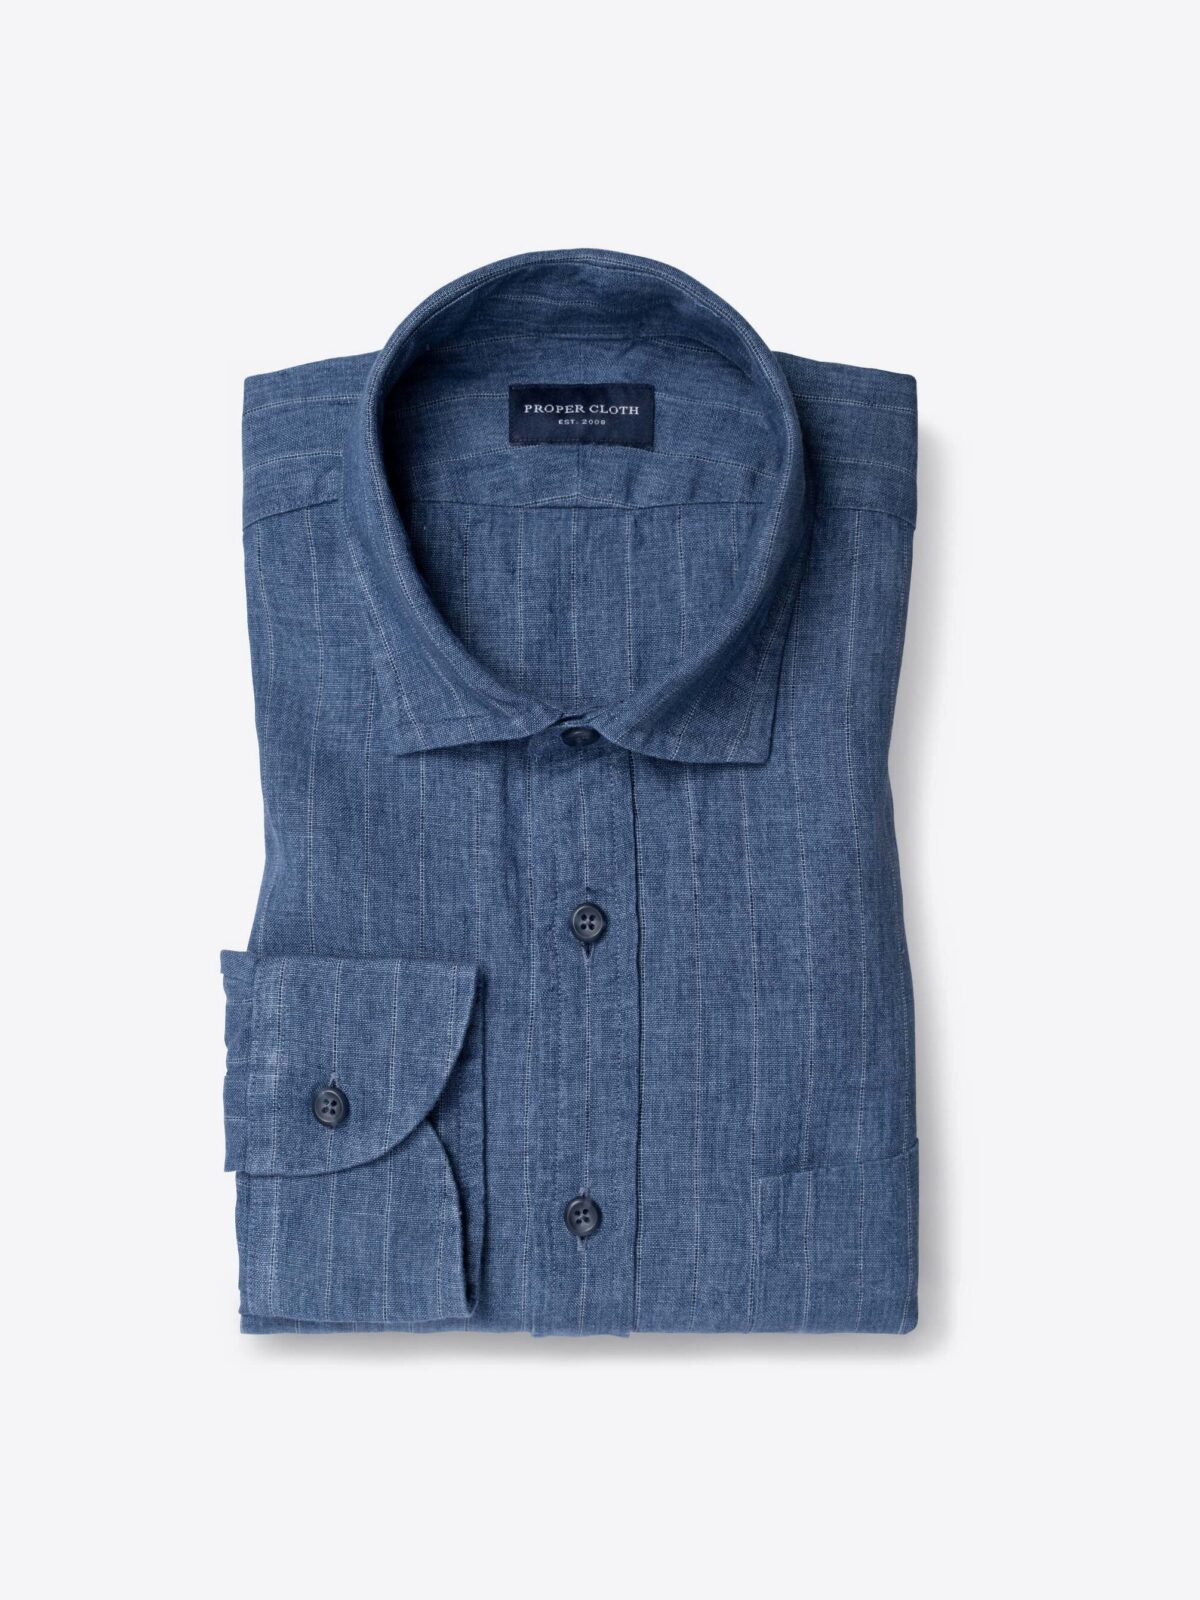 Leomaster Faded Blue Pinstripe Linen Shirt by Proper Cloth